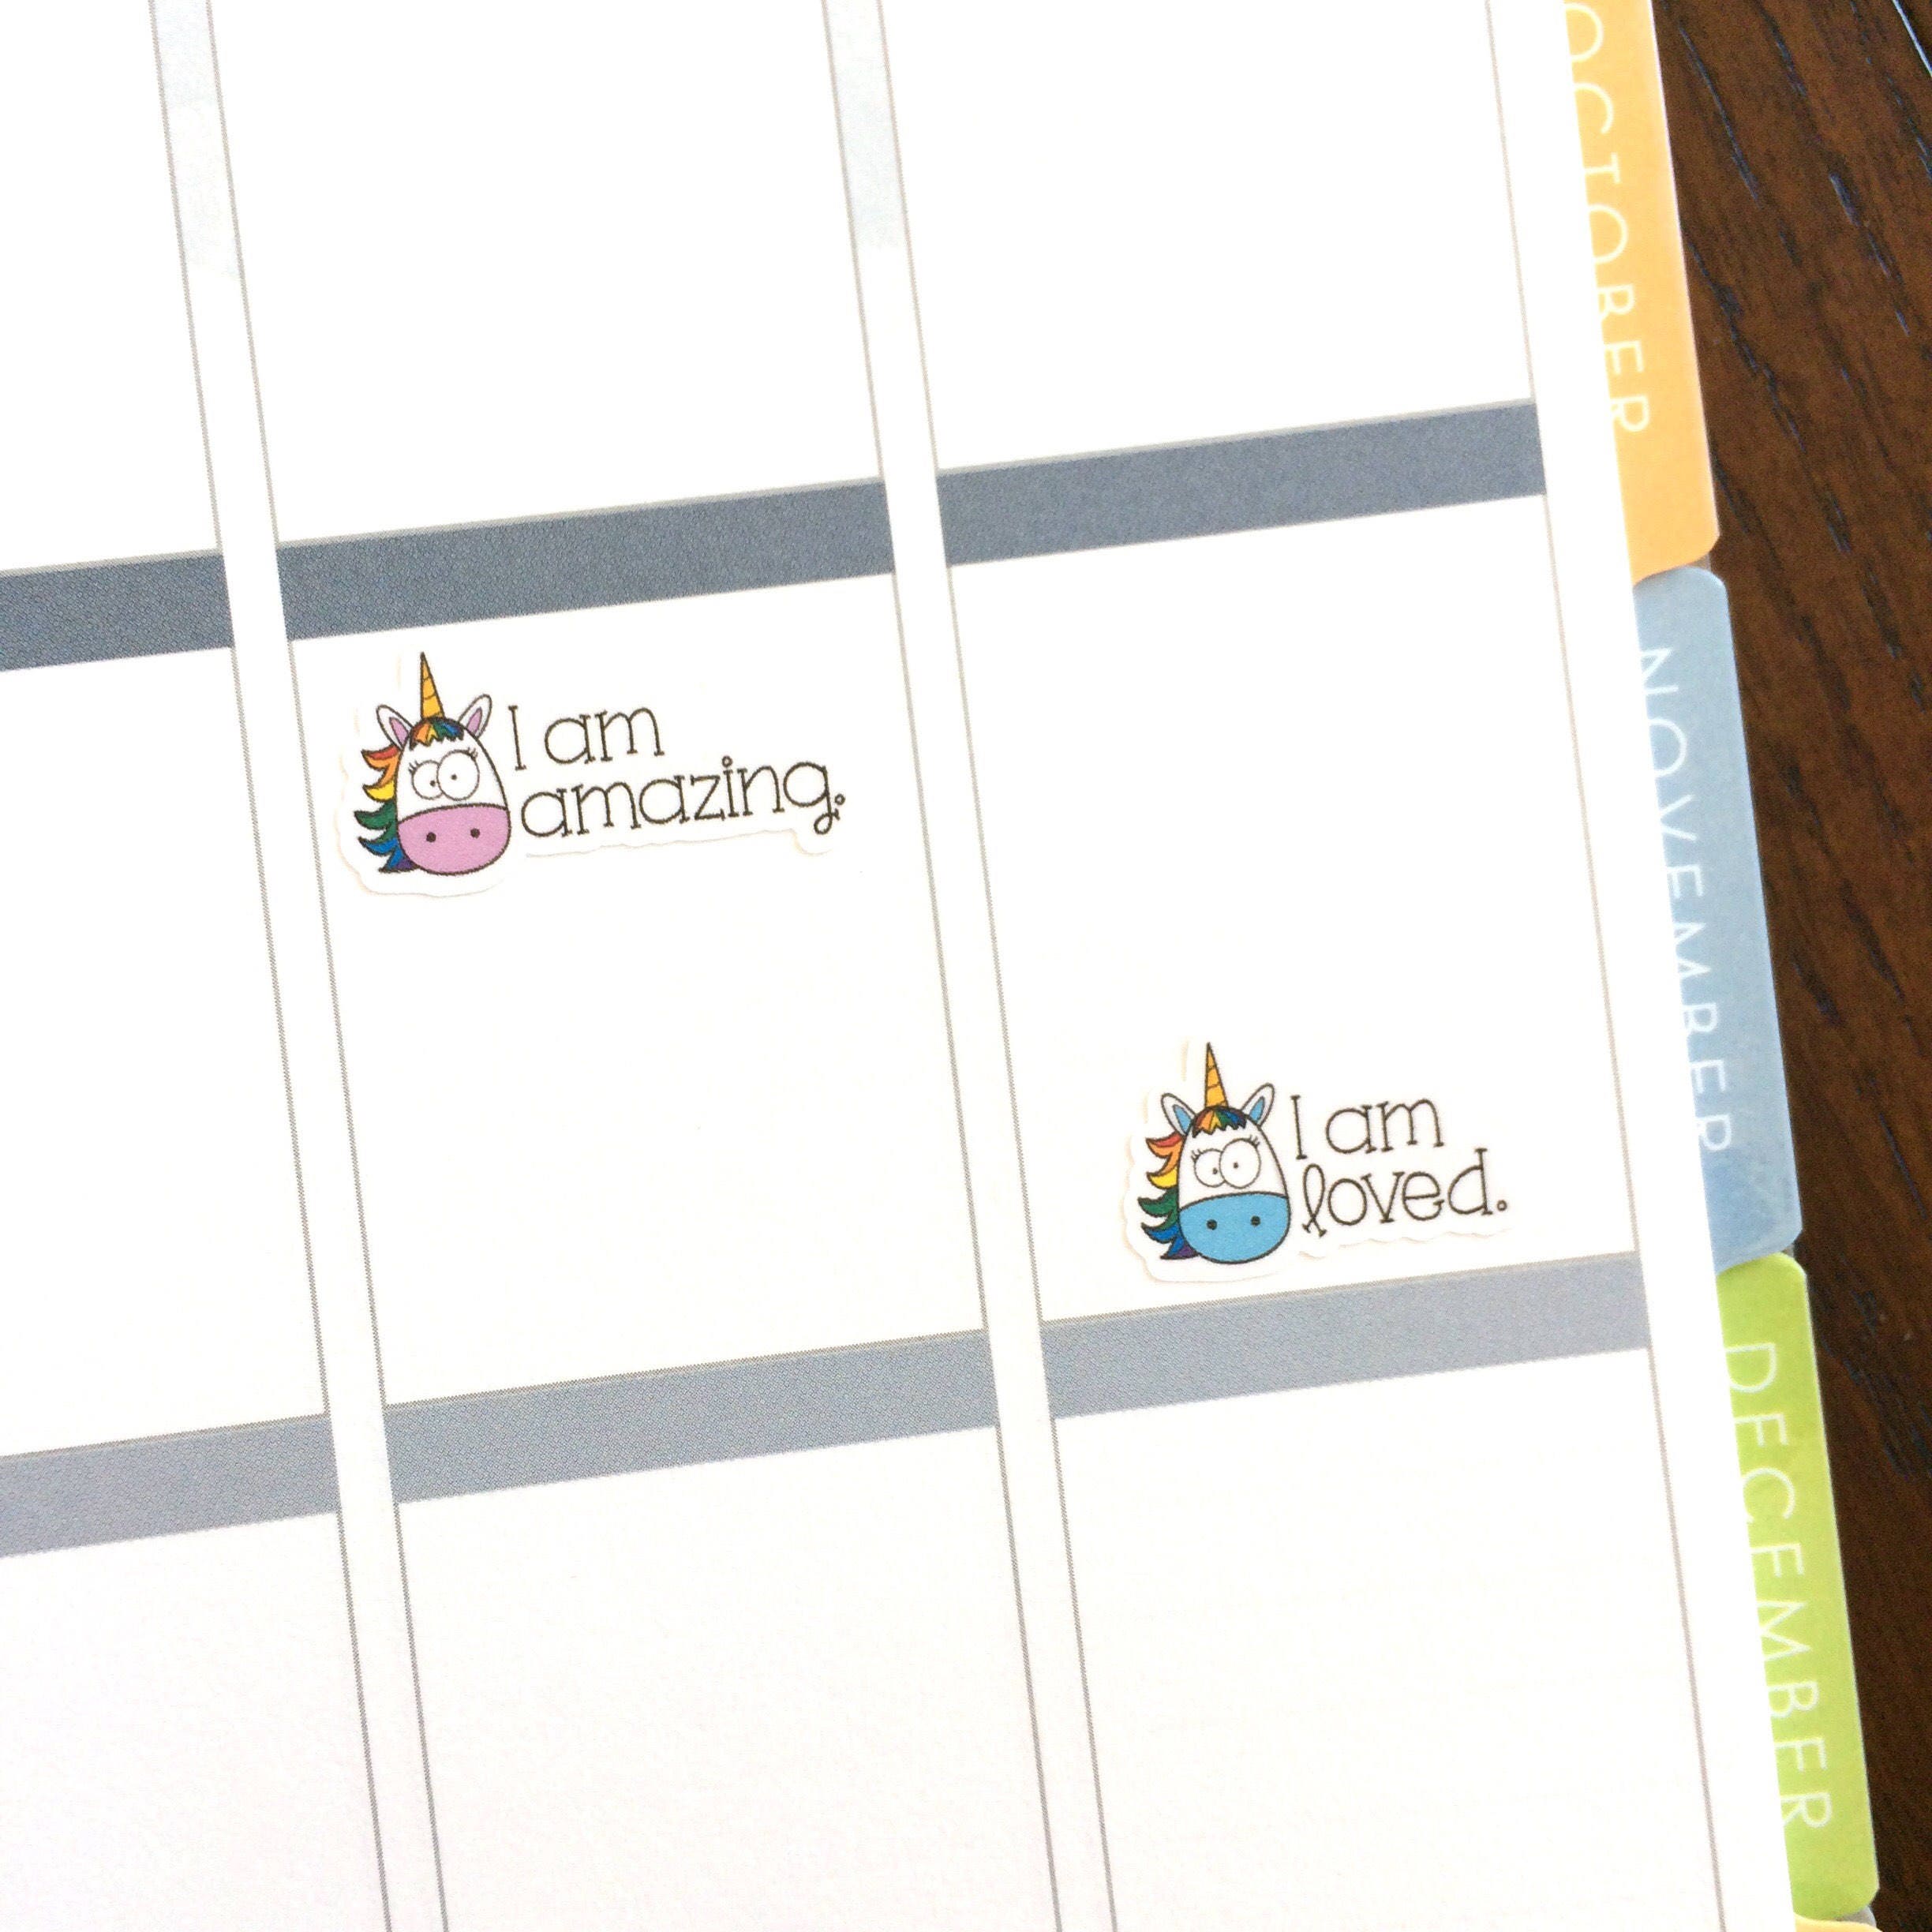 Color Choice Tiny Date Stickers Countdown Stickers Small Number Stickers  Calendar Stickers Monthly View Stickers Date Dots 